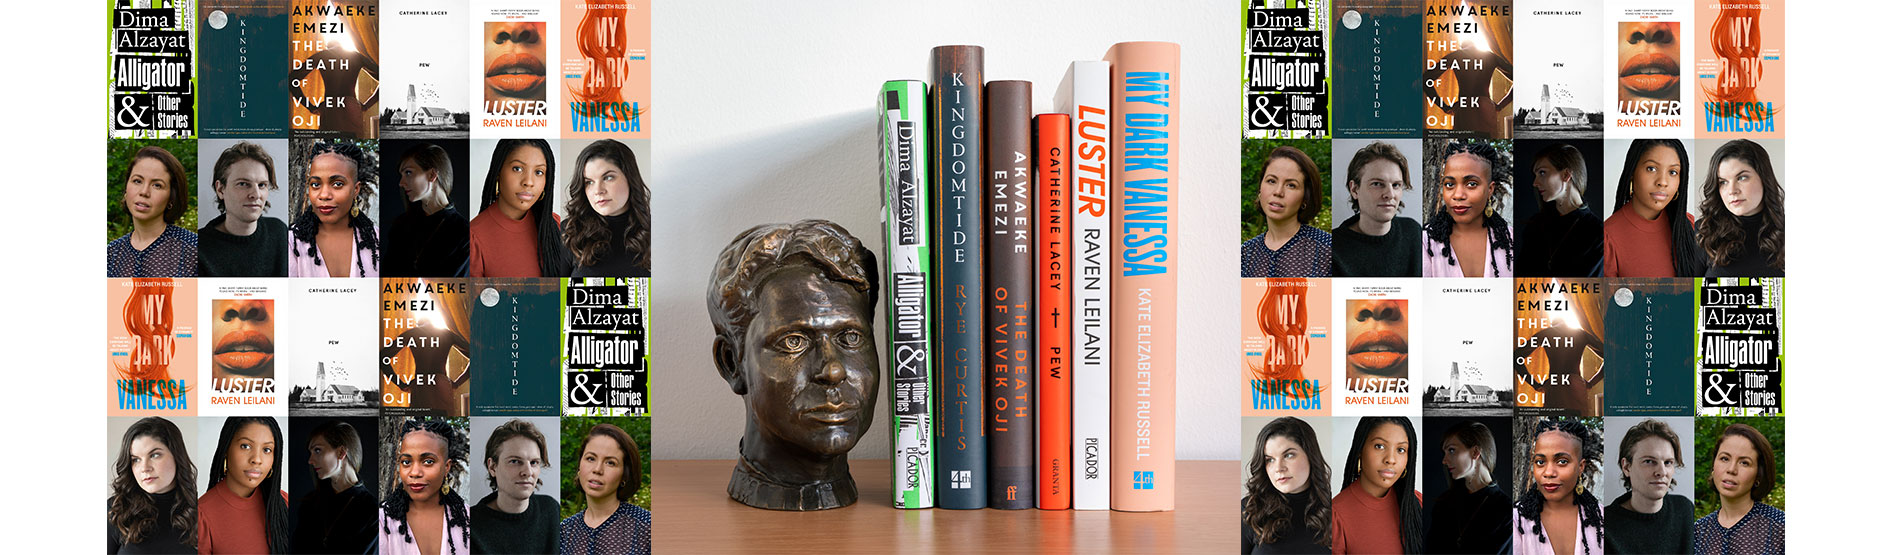 Swansea University Dylan Thomas Prize 2021 Shortlist Book Review Competition Goes Global!